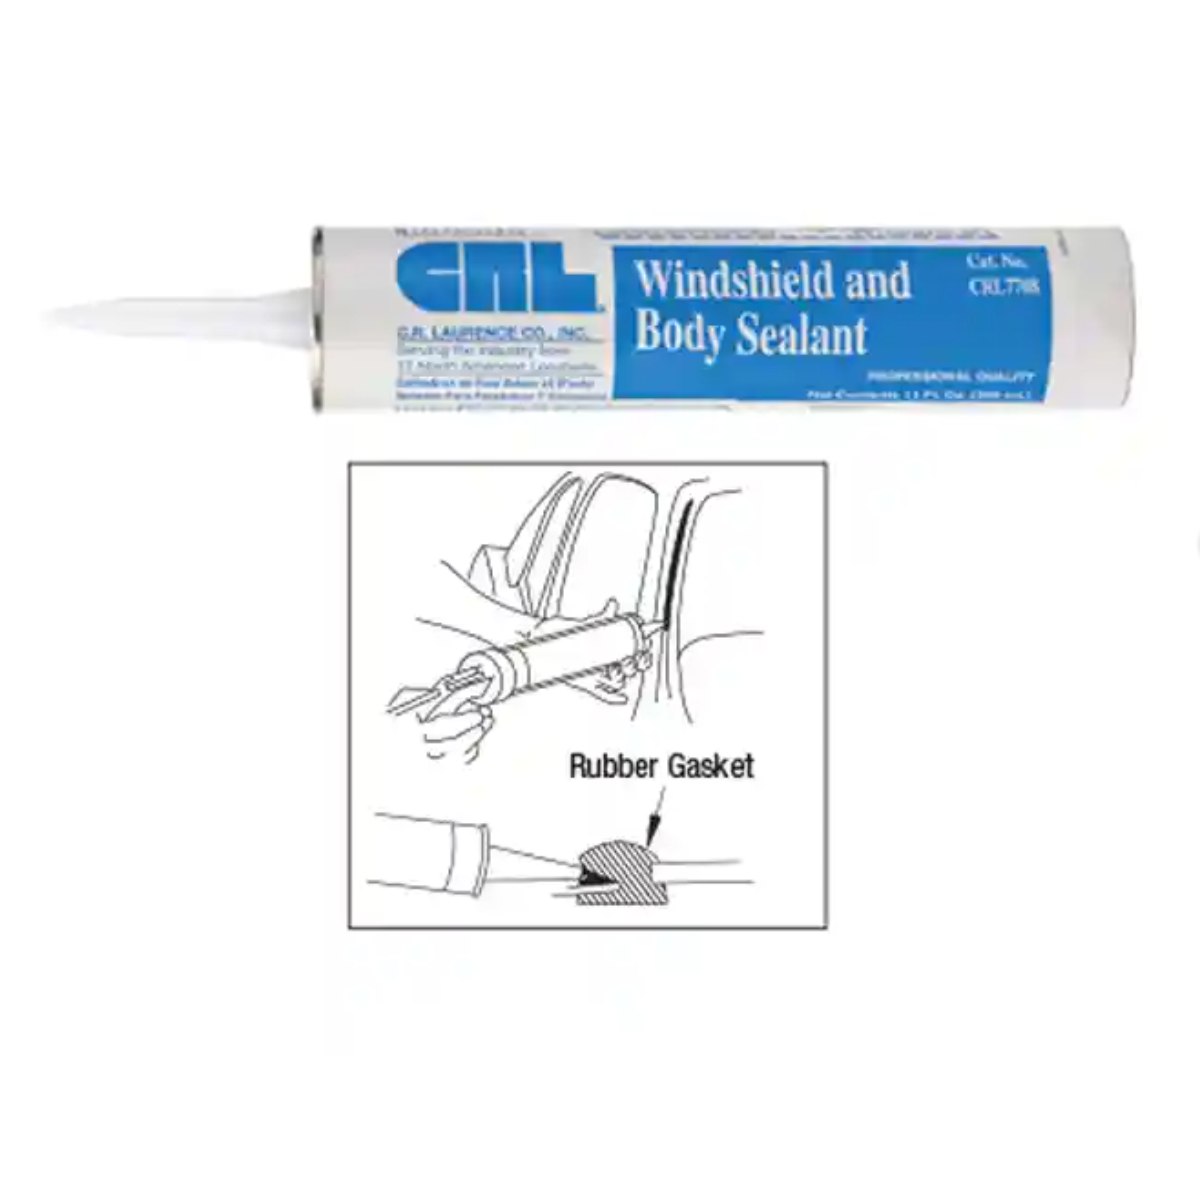 C.R. Laurence CRL7708 Black Windshield and Body Sealant, 1 Pack - image 5 of 6